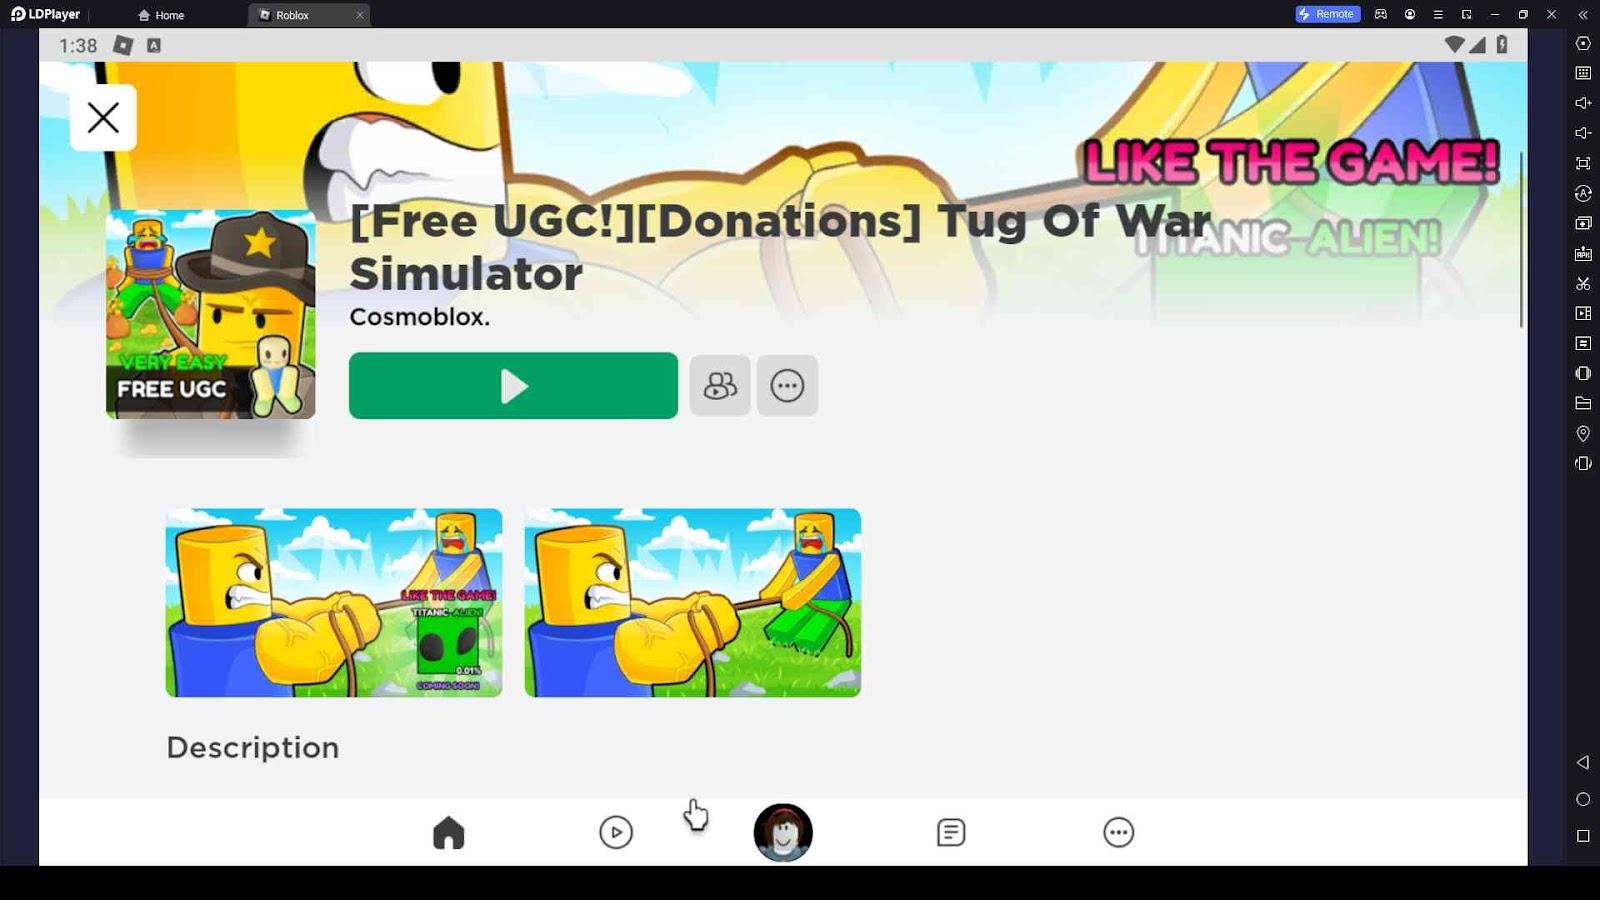 Tug of War Simulator codes for free spins, tickets, eggs & more